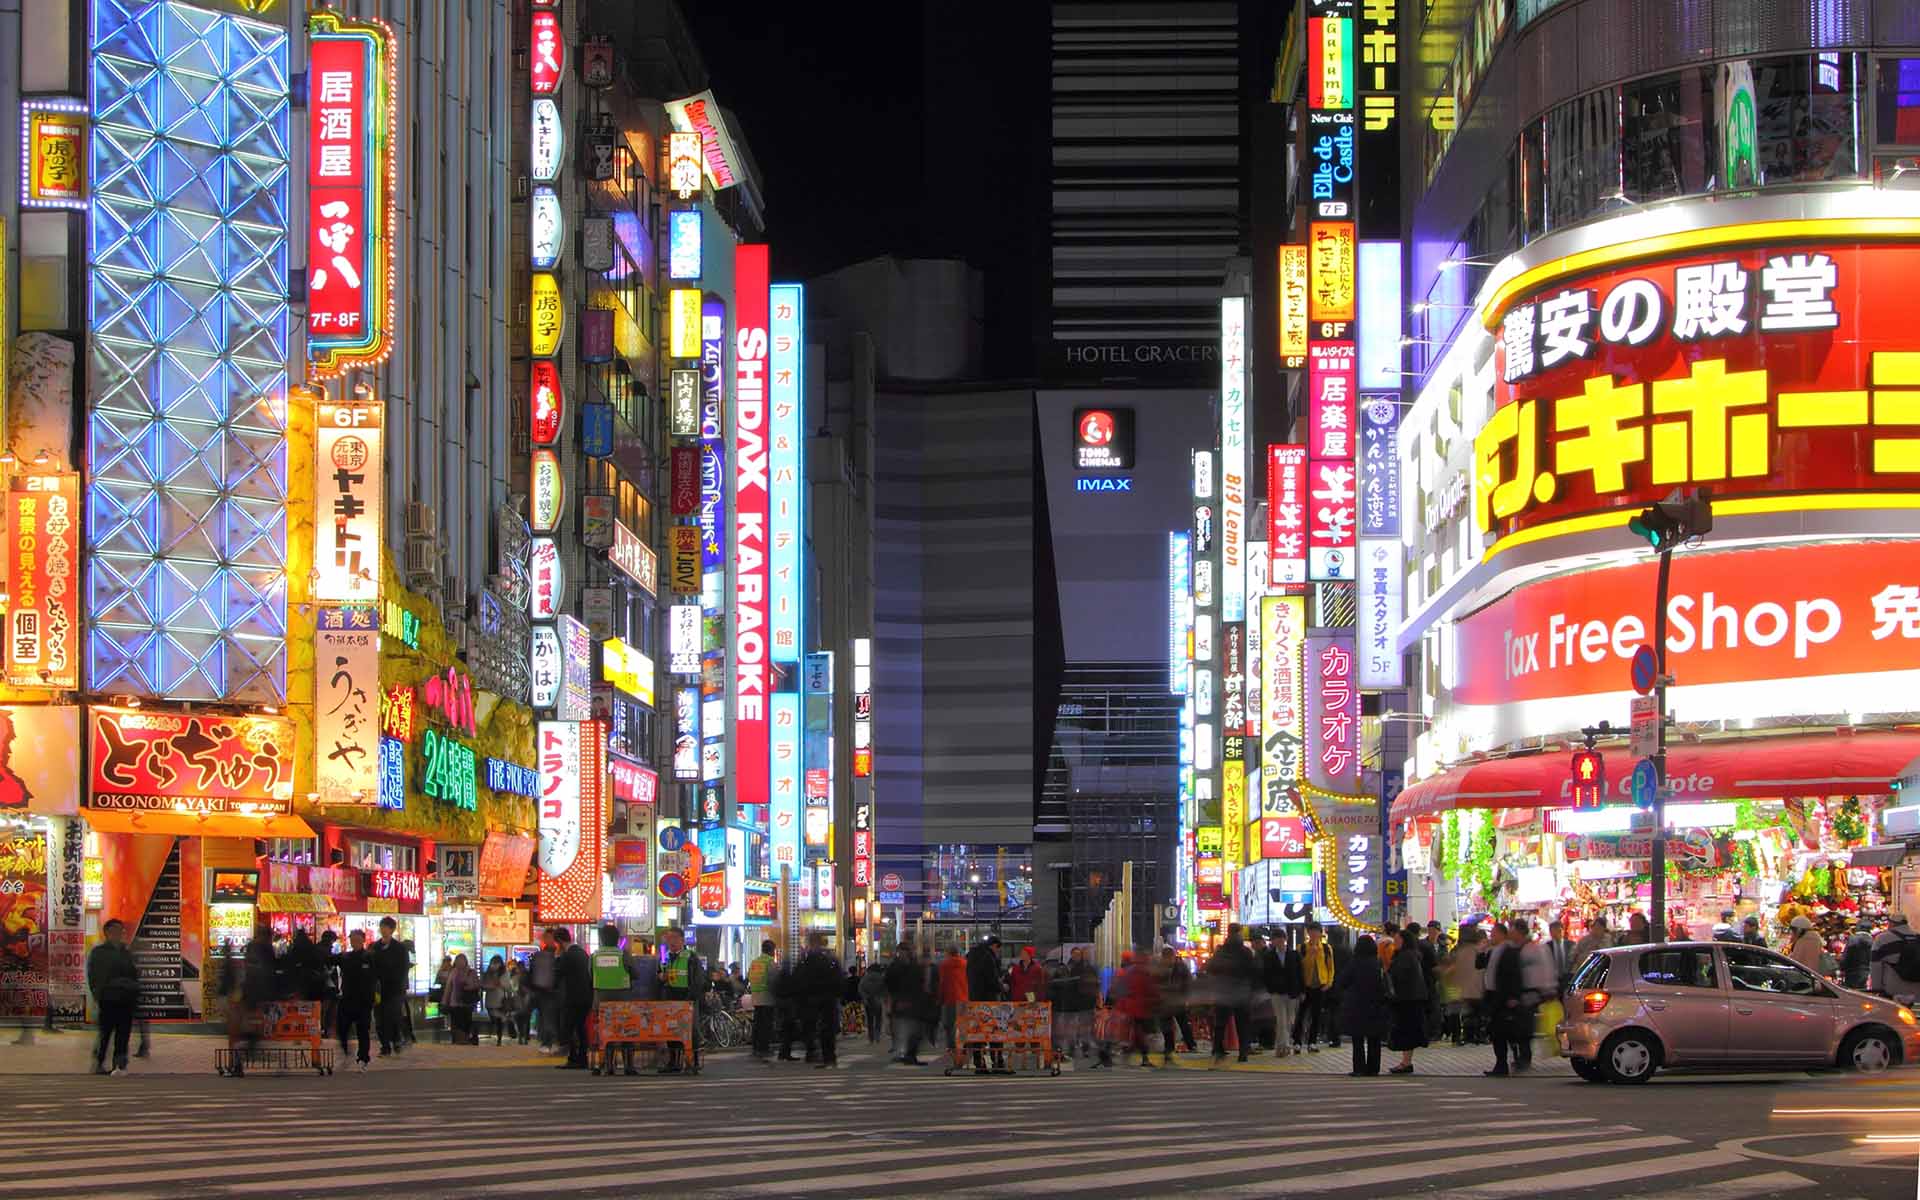 Crypto Exchange Giant Coinbase Announces Opening of Japan Office